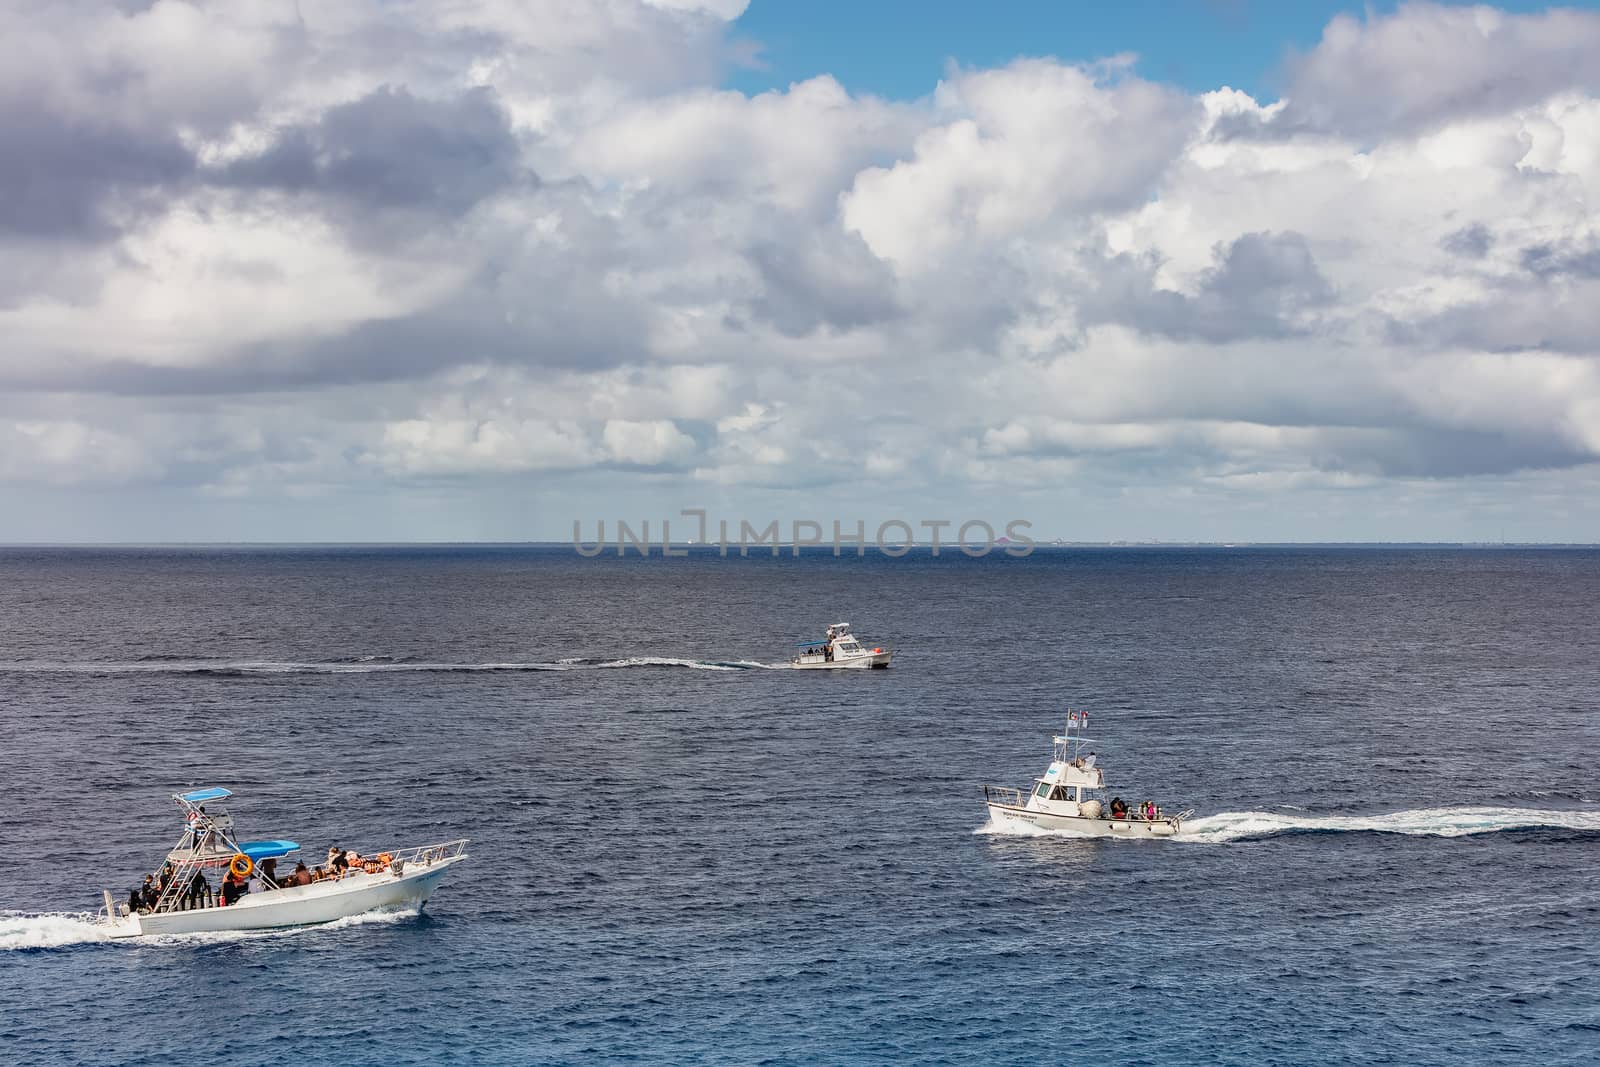 Cozumel, Mexico - December 17, 2019: Fishing and diving boats sailing by the island of Cozumel in Mexico. Boats full of tourists. Beautiful clouds in the background.